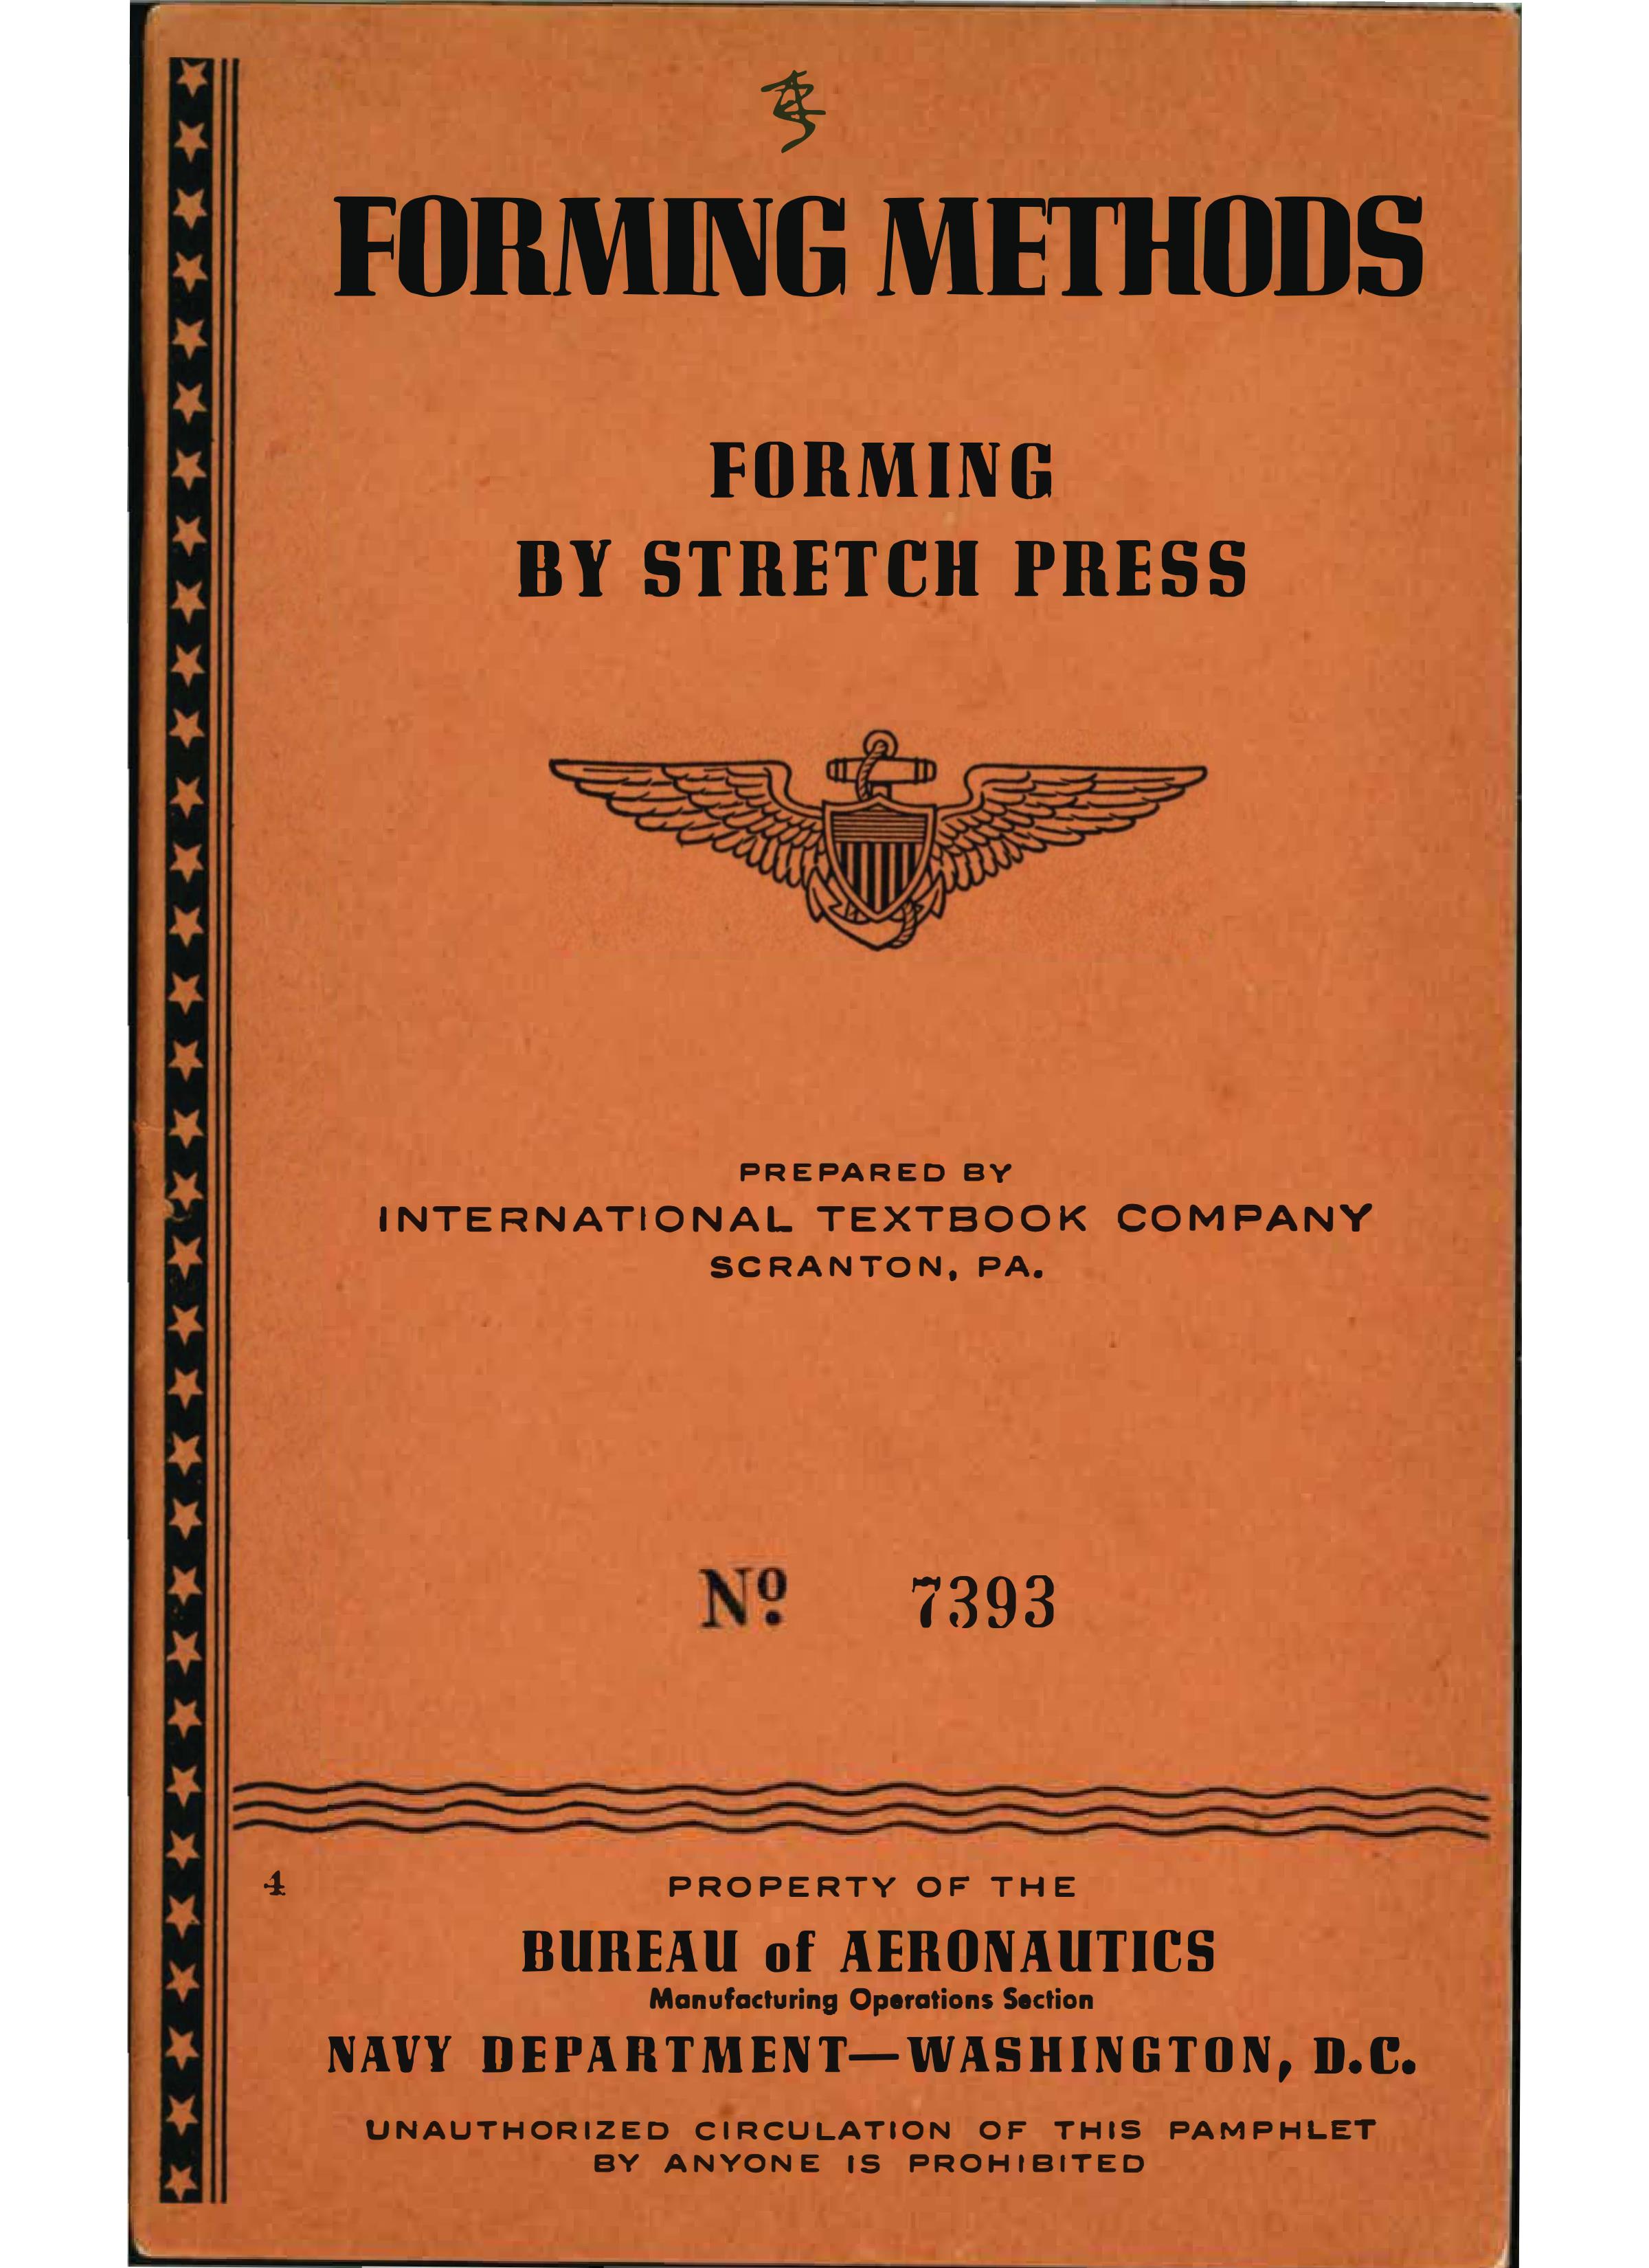 Sample page 1 from AirCorps Library document: Forming Methods - Stretch Press - Bureau of Aeronautics